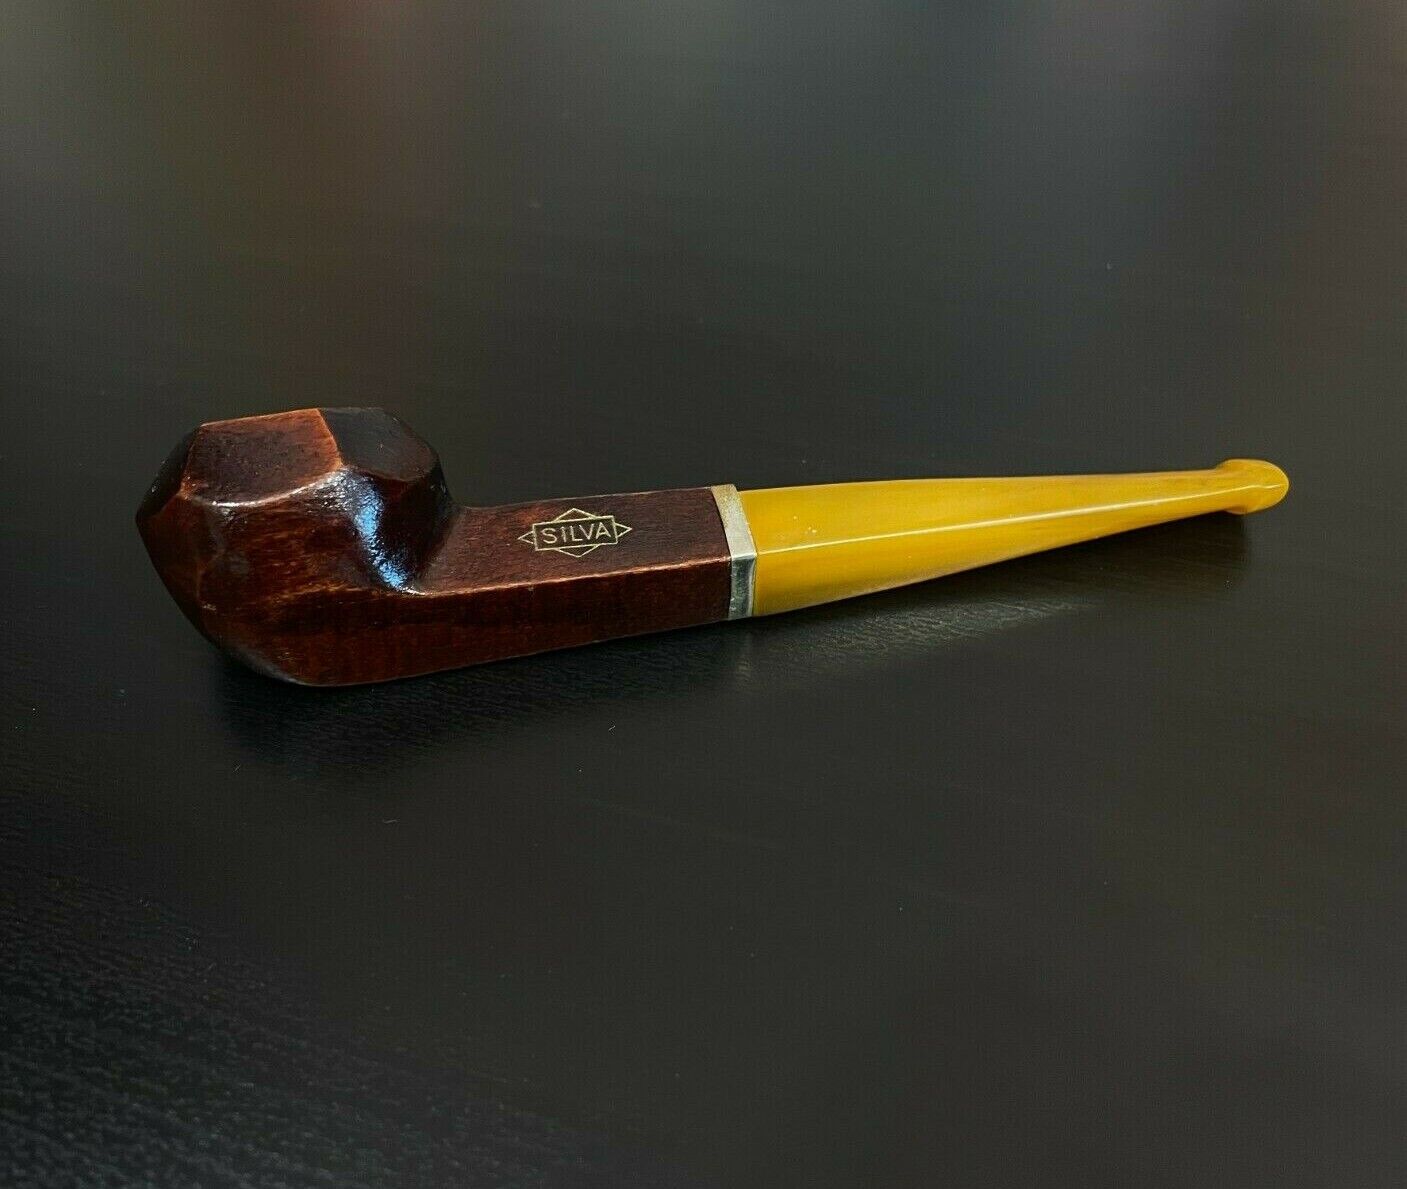 Silva Wooden Smoking Pipe Mouthpiece Tabacco Cigarette Vintage Old 60s 70s